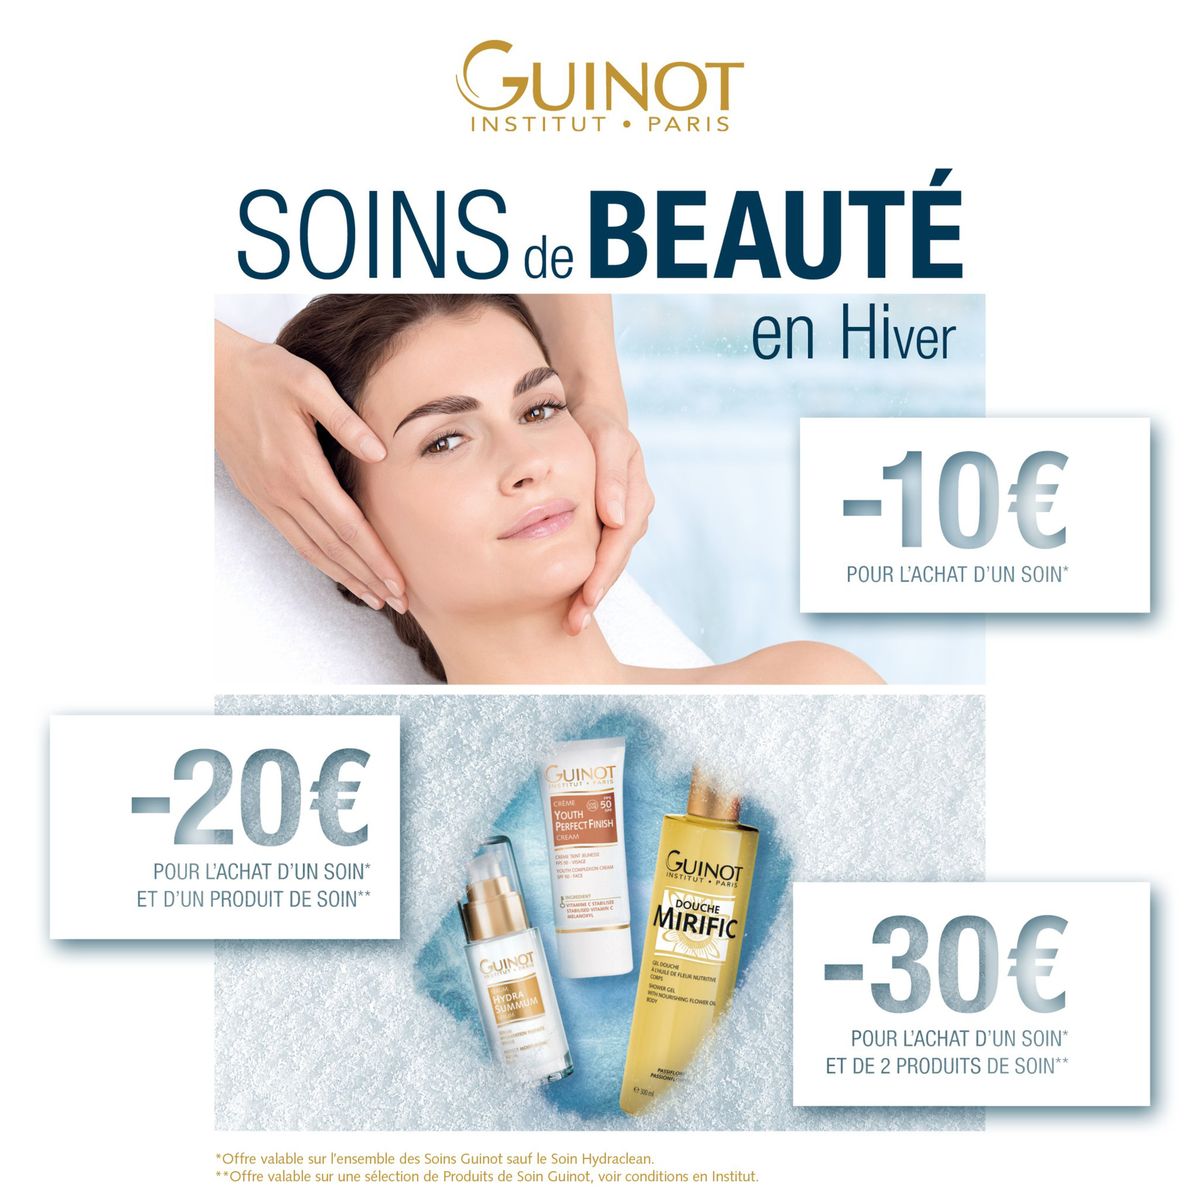 Catalogue Offres Guinot, page 00001